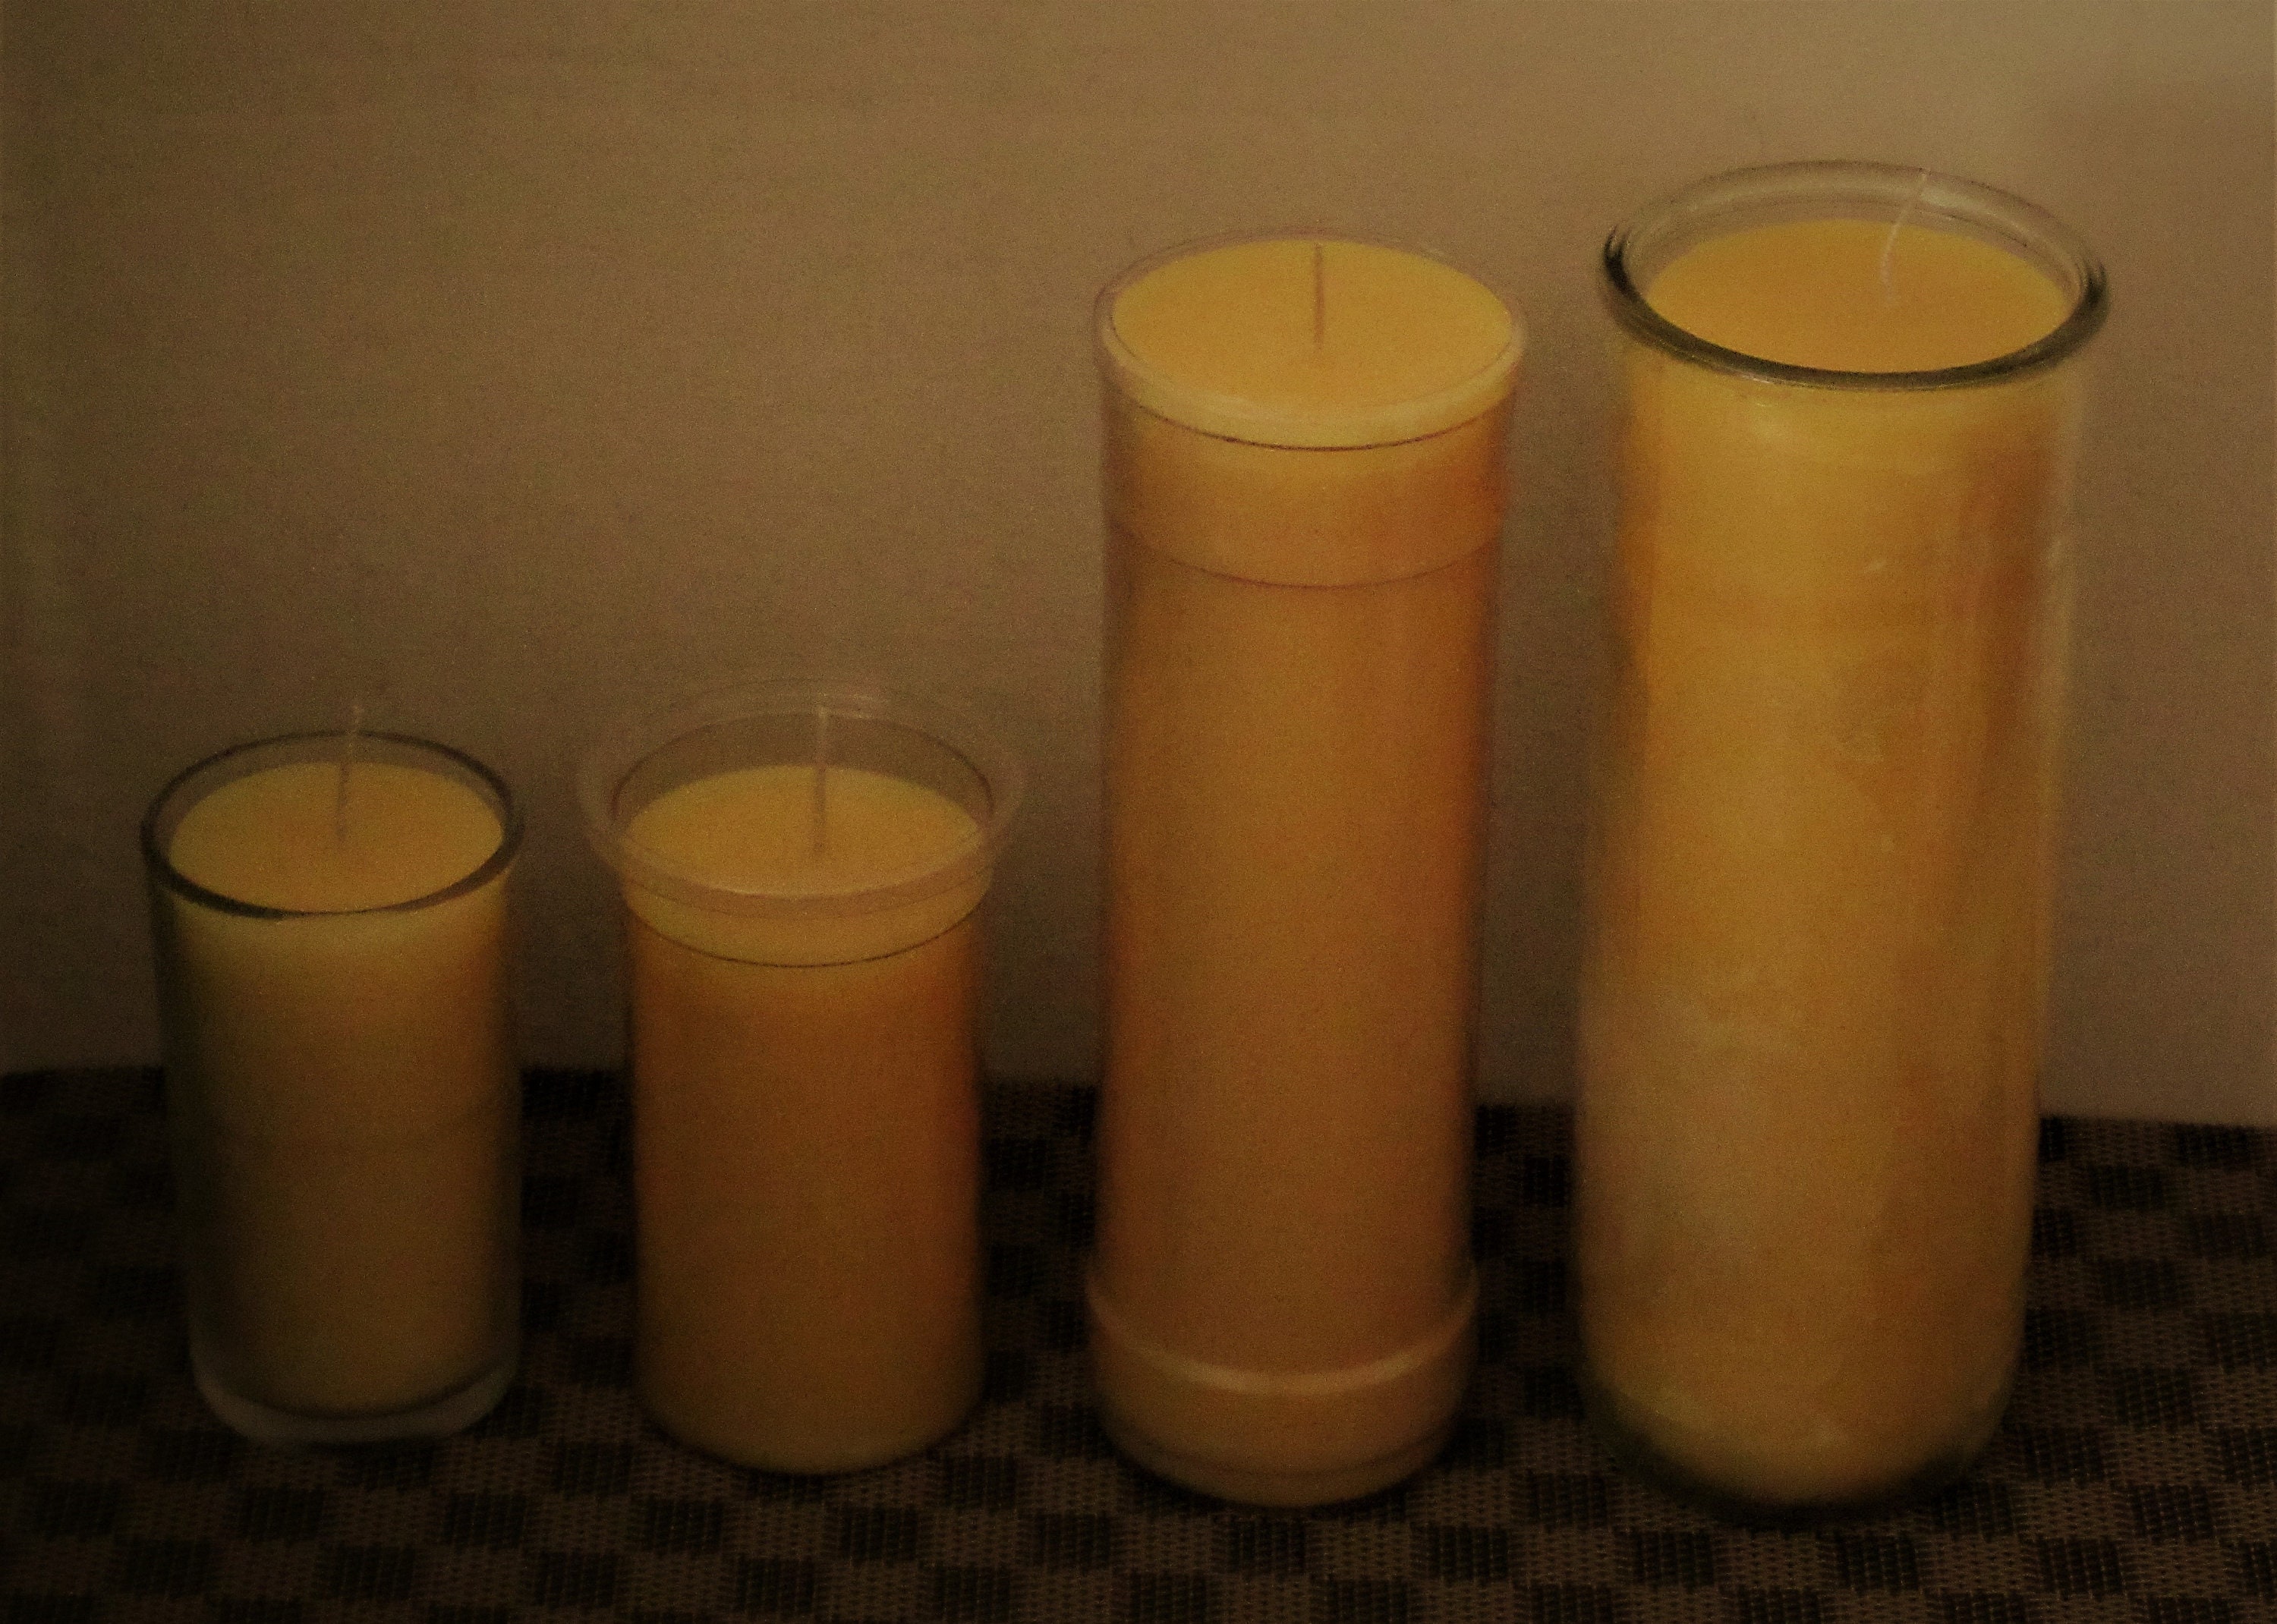 EMERGENCY CANDLE SET, CANDLES, HOLDERS, HOME DECOR  Emergency candles,  Candles storage, Candle holder set